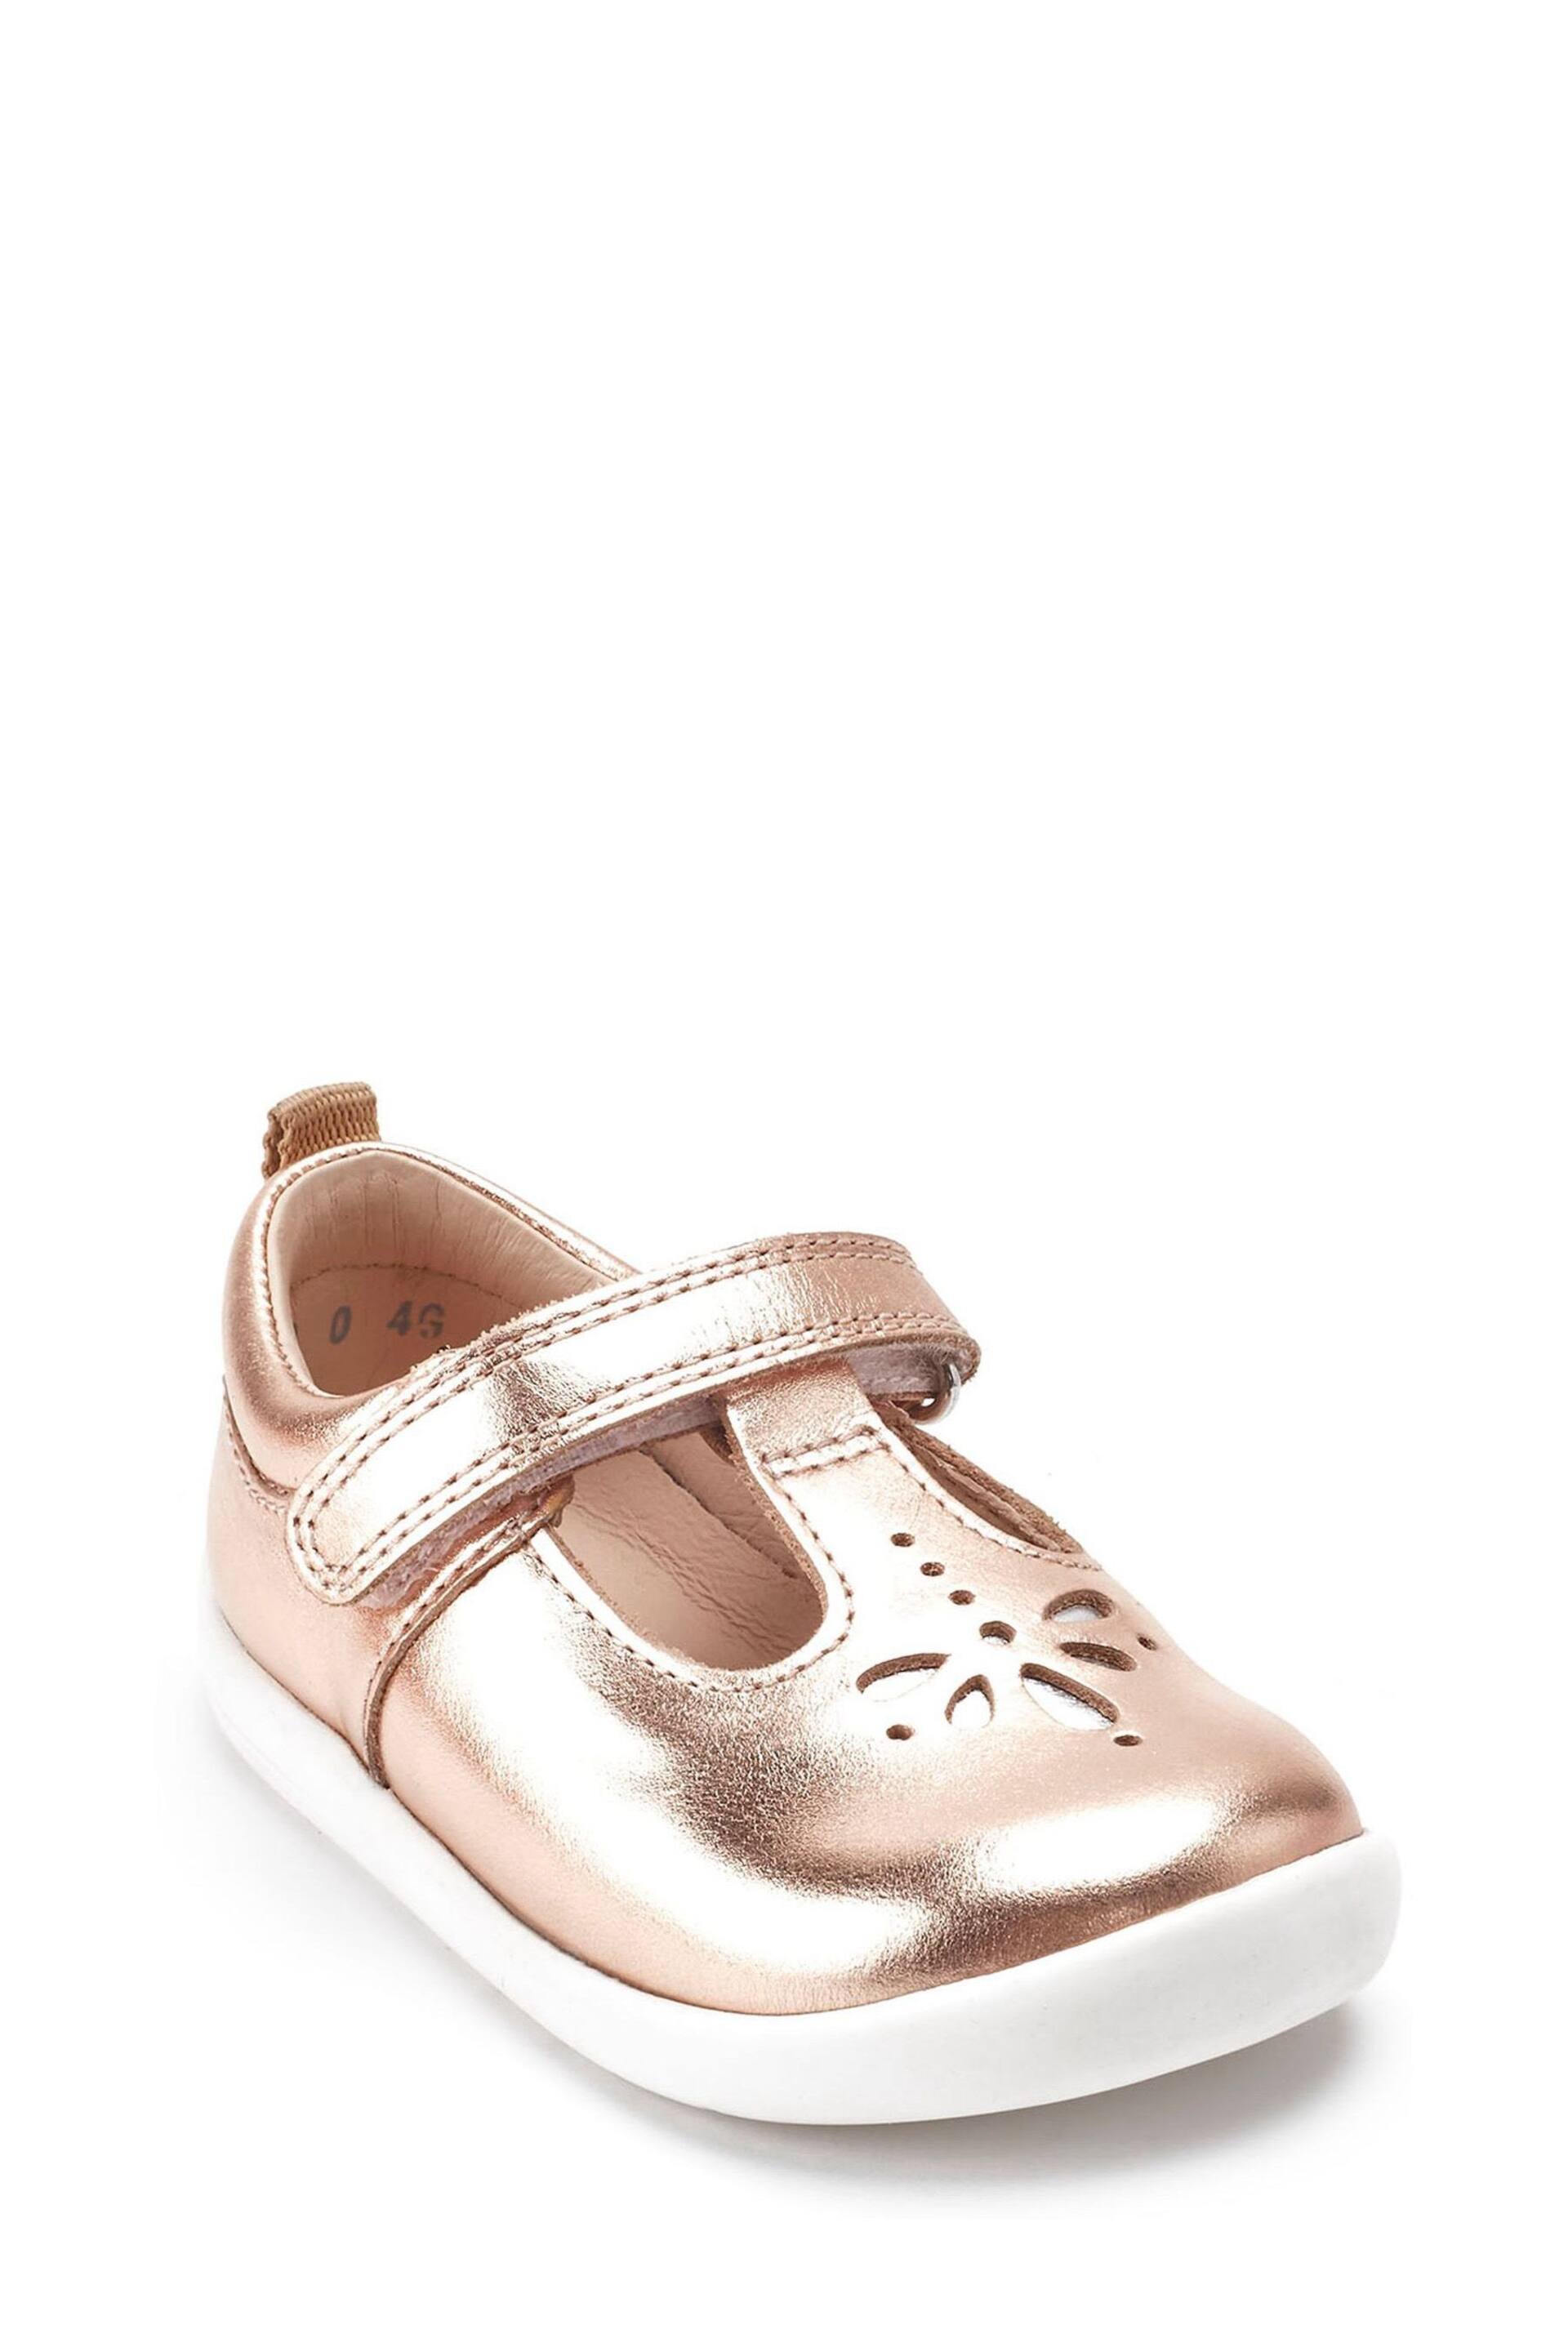 Start-Rite Puzzle Rose Gold Leather T-Bar First Shoes F & G Fit - Image 5 of 5